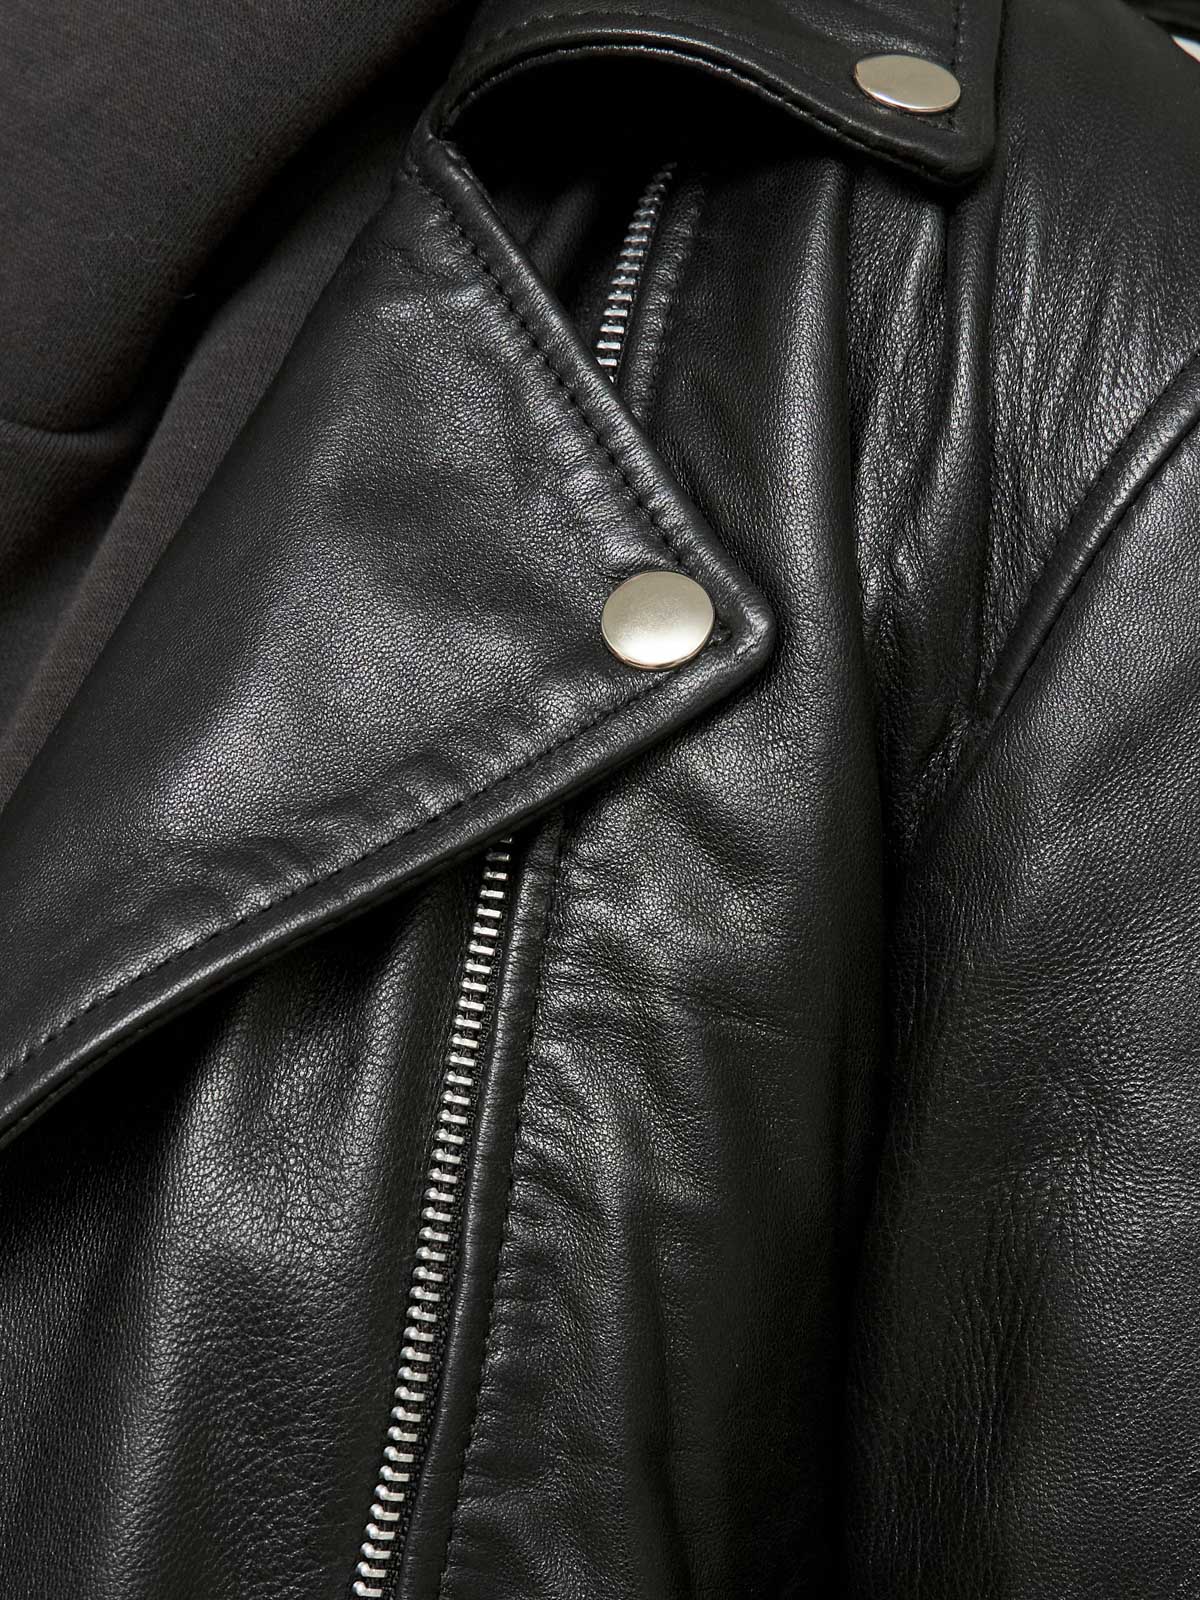 Carbon Gloss Leather Jacket Men/ LMTD Edition